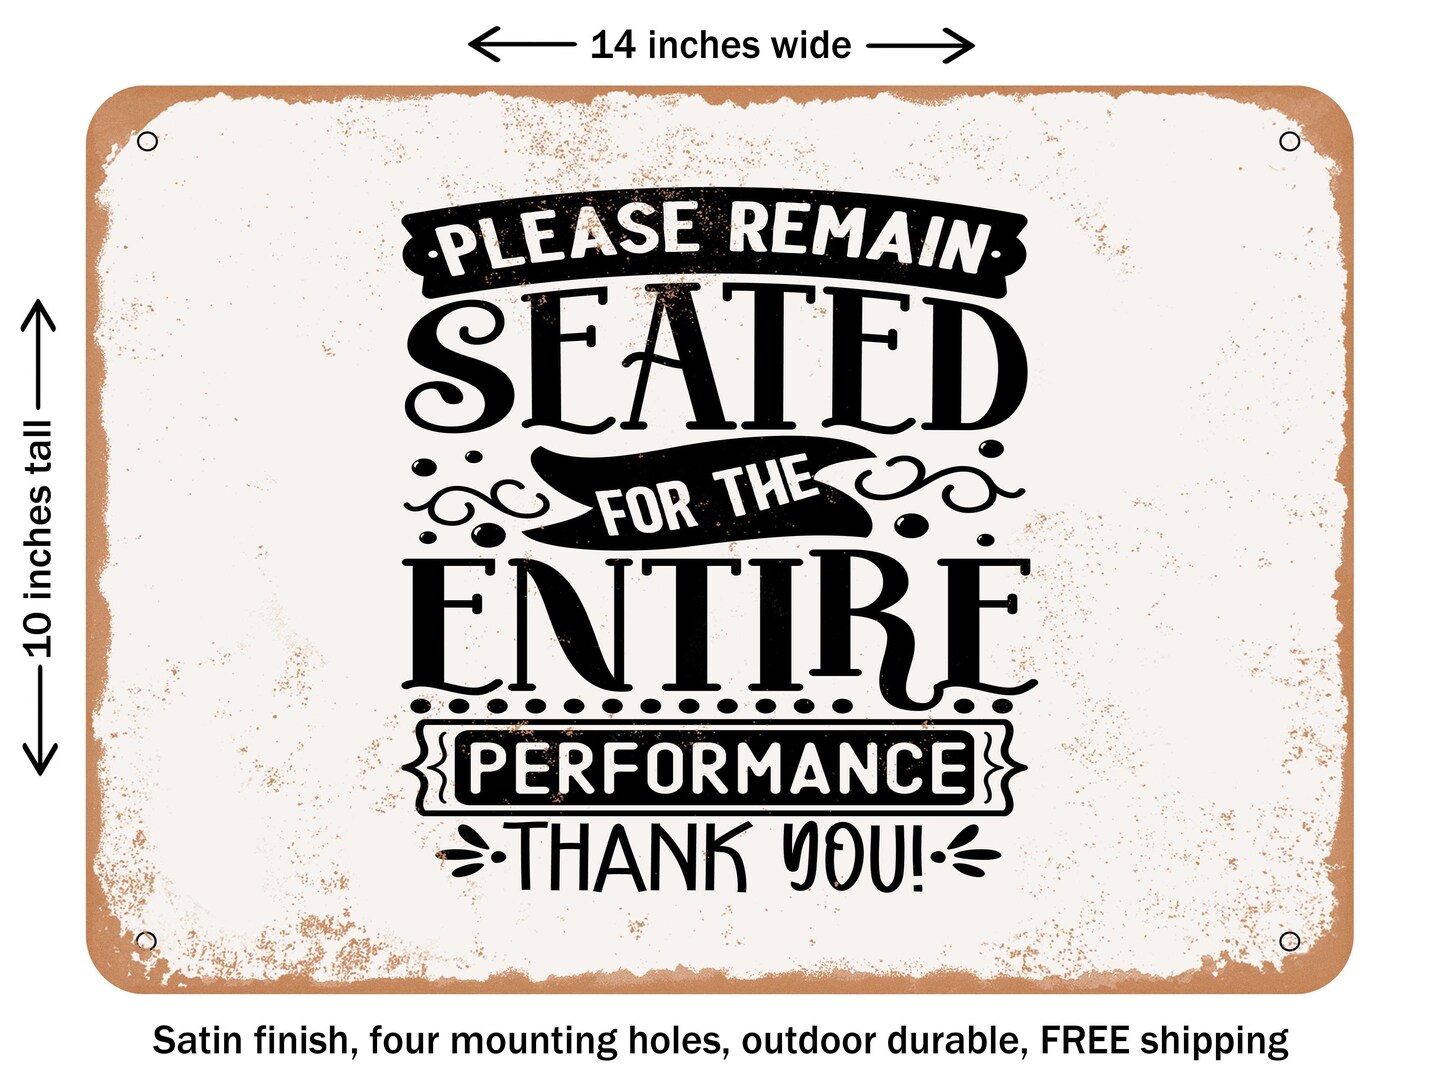 DECORATIVE METAL SIGN - Please Remain Seated For the Entire Performance Thank You - Vintage Rusty Look